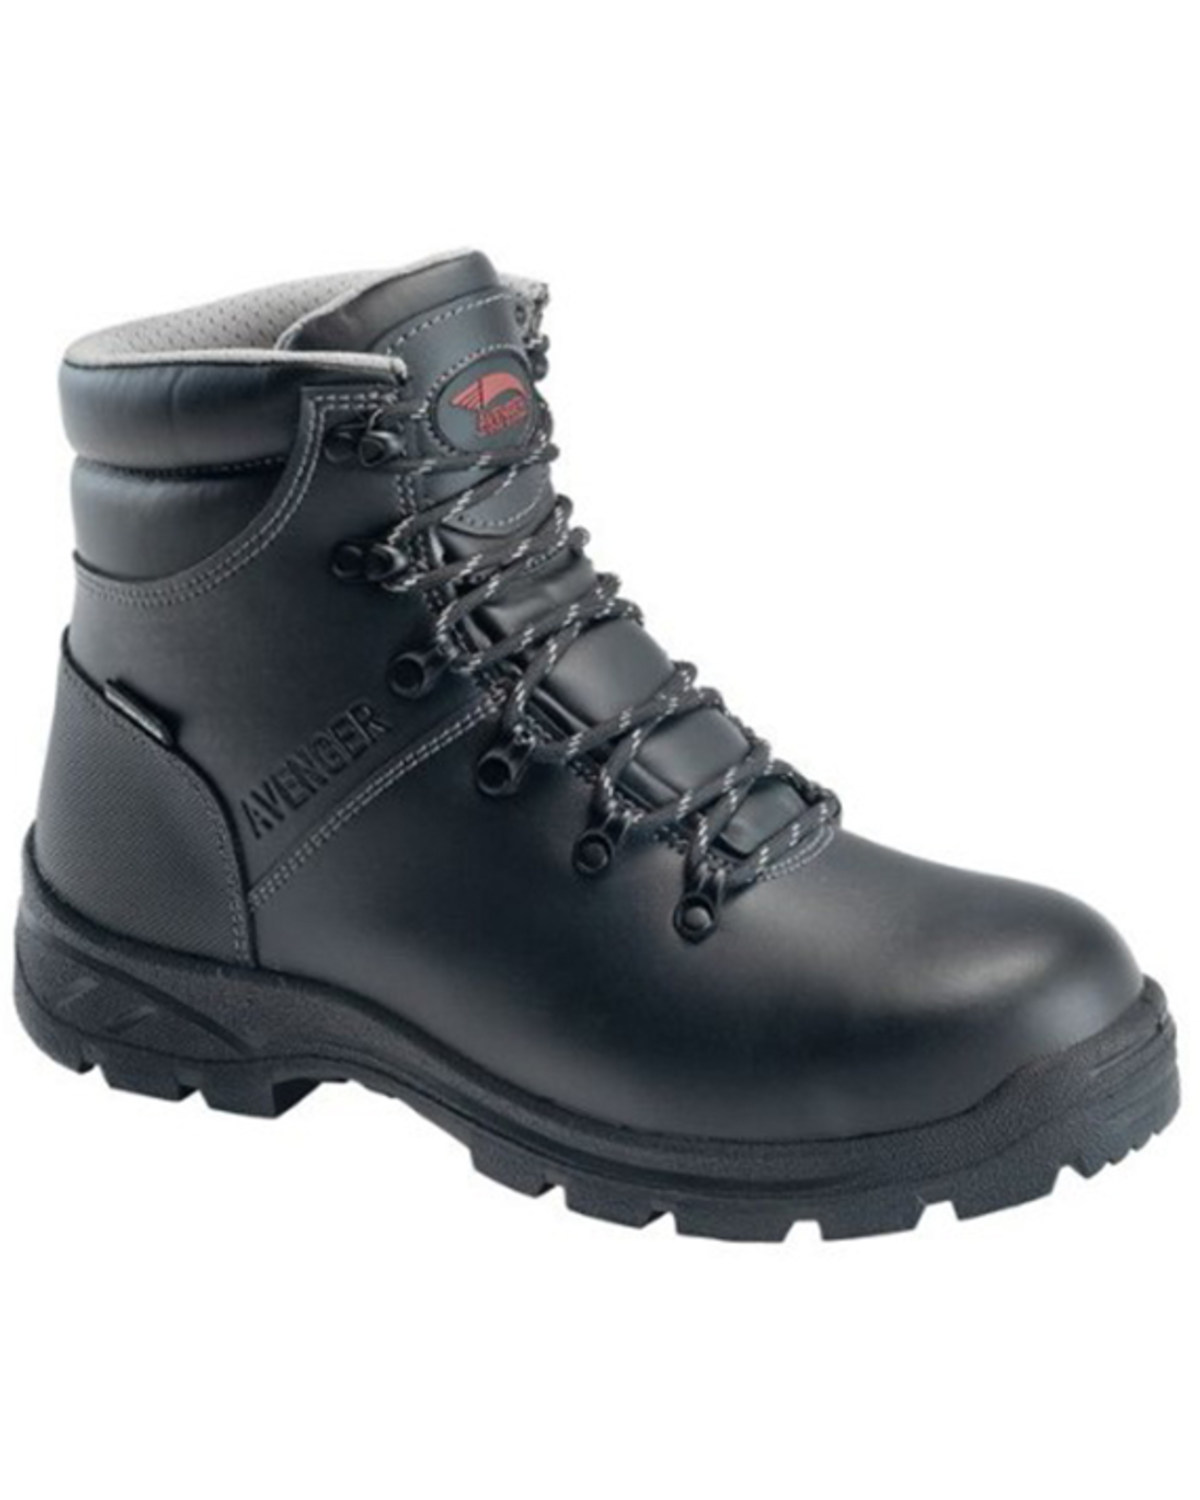 Avenger Men's 8624 Builder Mid 6" Waterproof Lace-Up Work Boots - Soft Toe